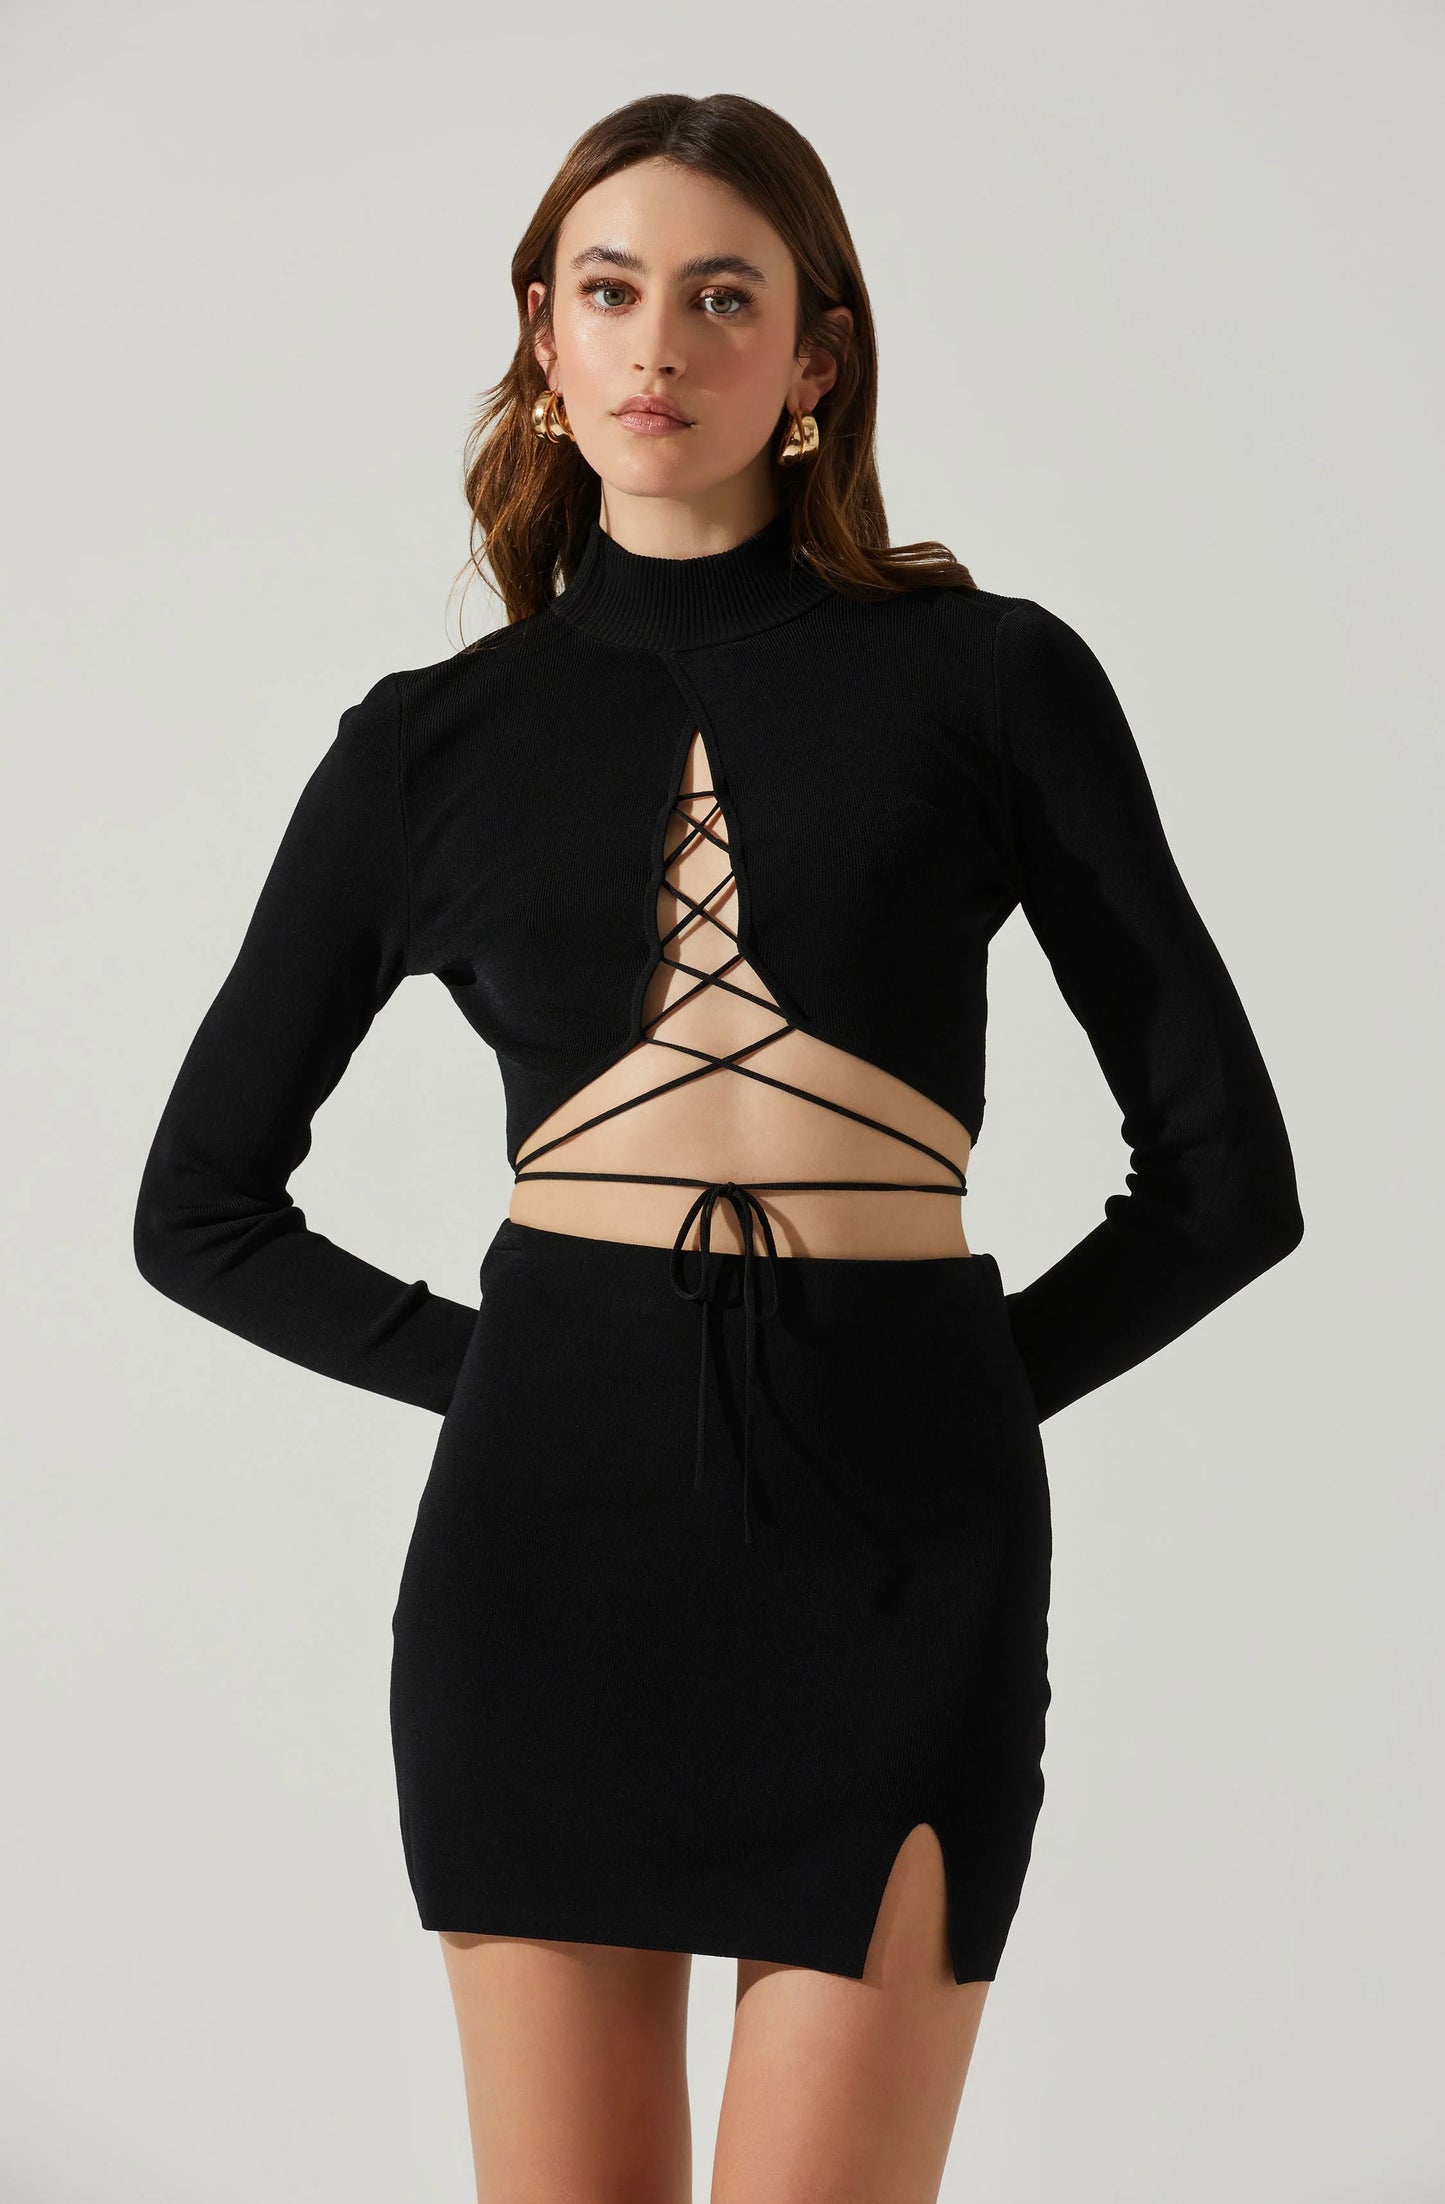 Raven Cropped Tie Top